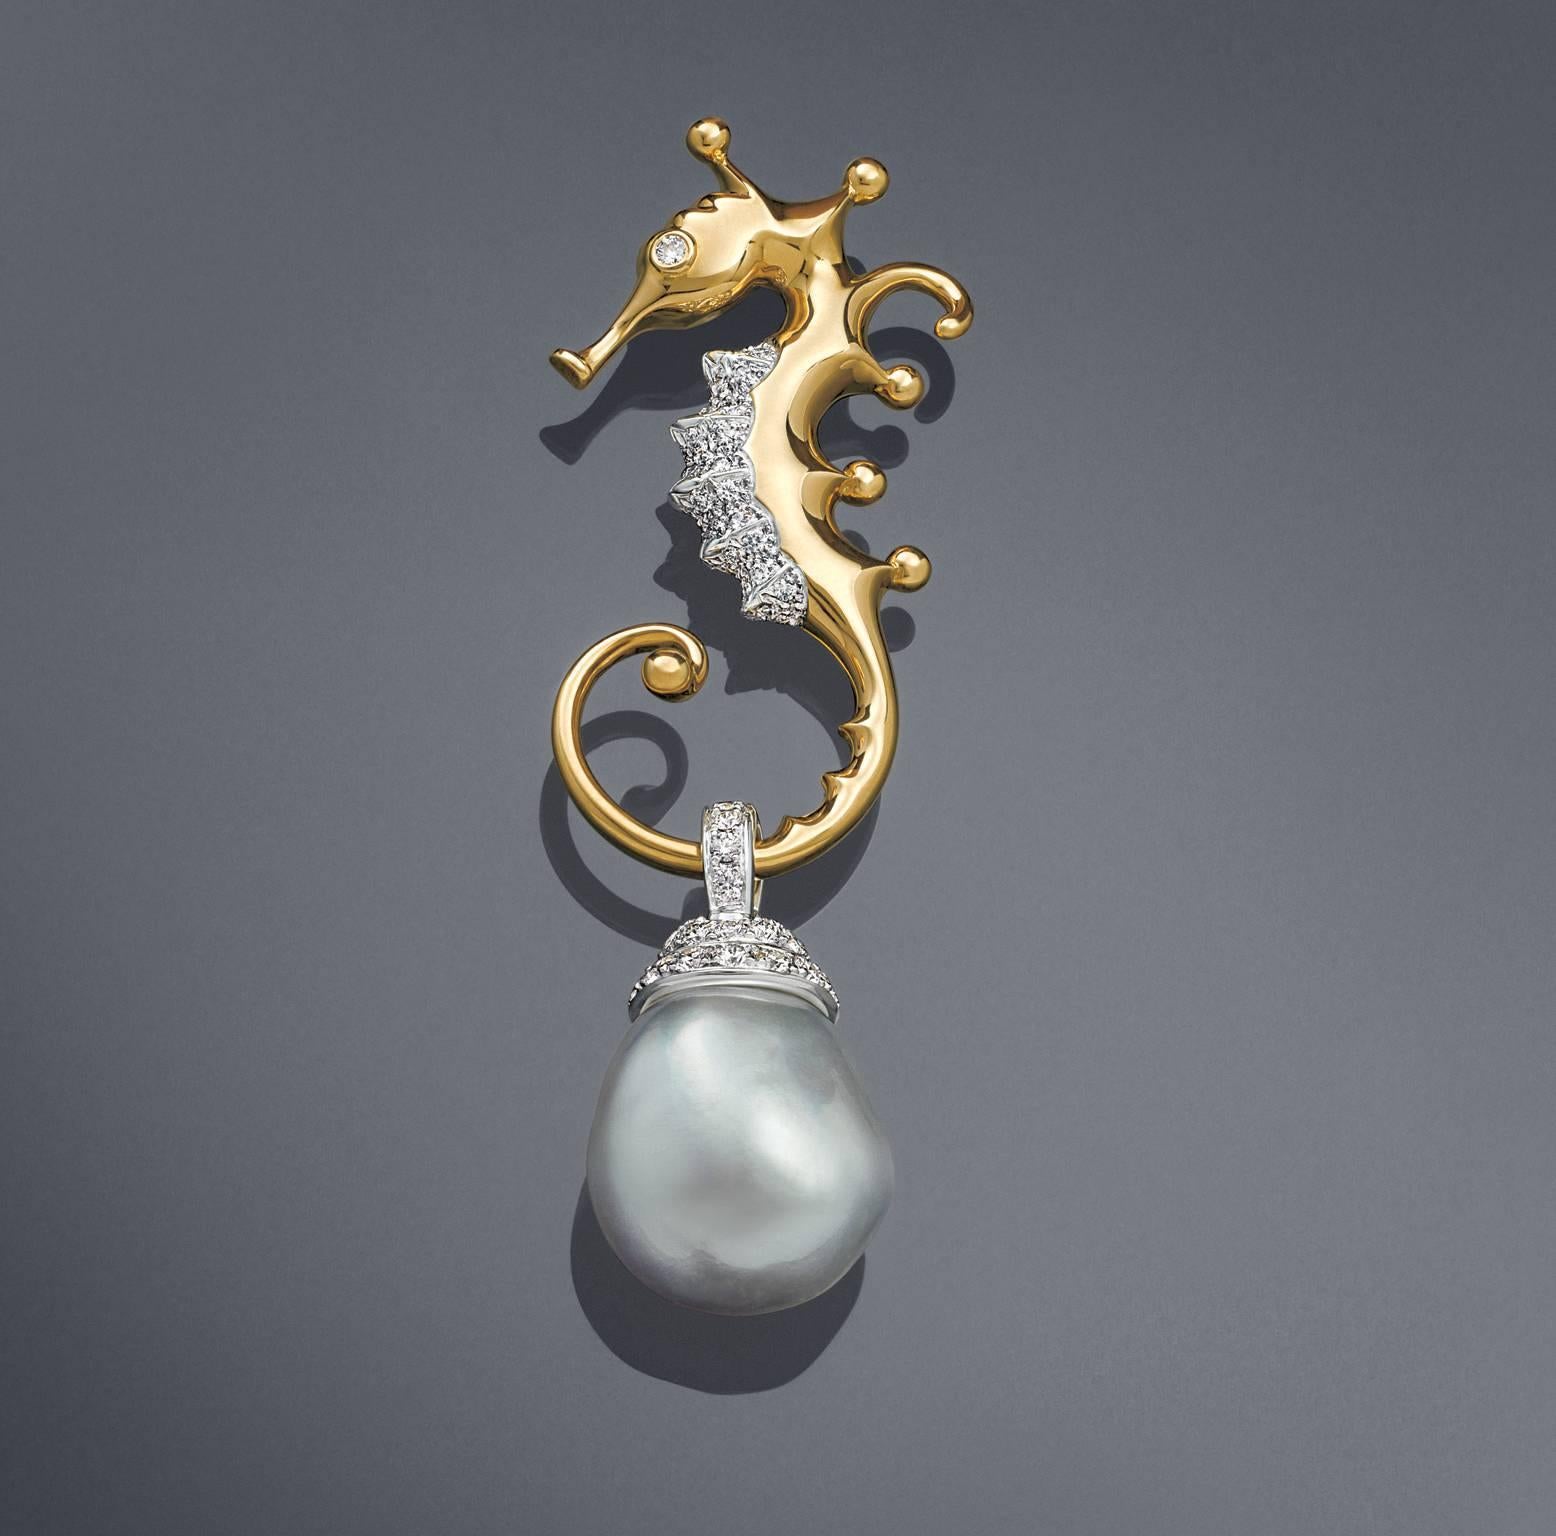 An exquisitely rendered, sculpted seahorse sits gracefully above a single Baroque Pearl pendant in this whimsical, yet supremely elegant brooch. Brooch is Platinum and 18K Yellow Gold. Designed by Angela Cummings for Assael of New York.

Gem